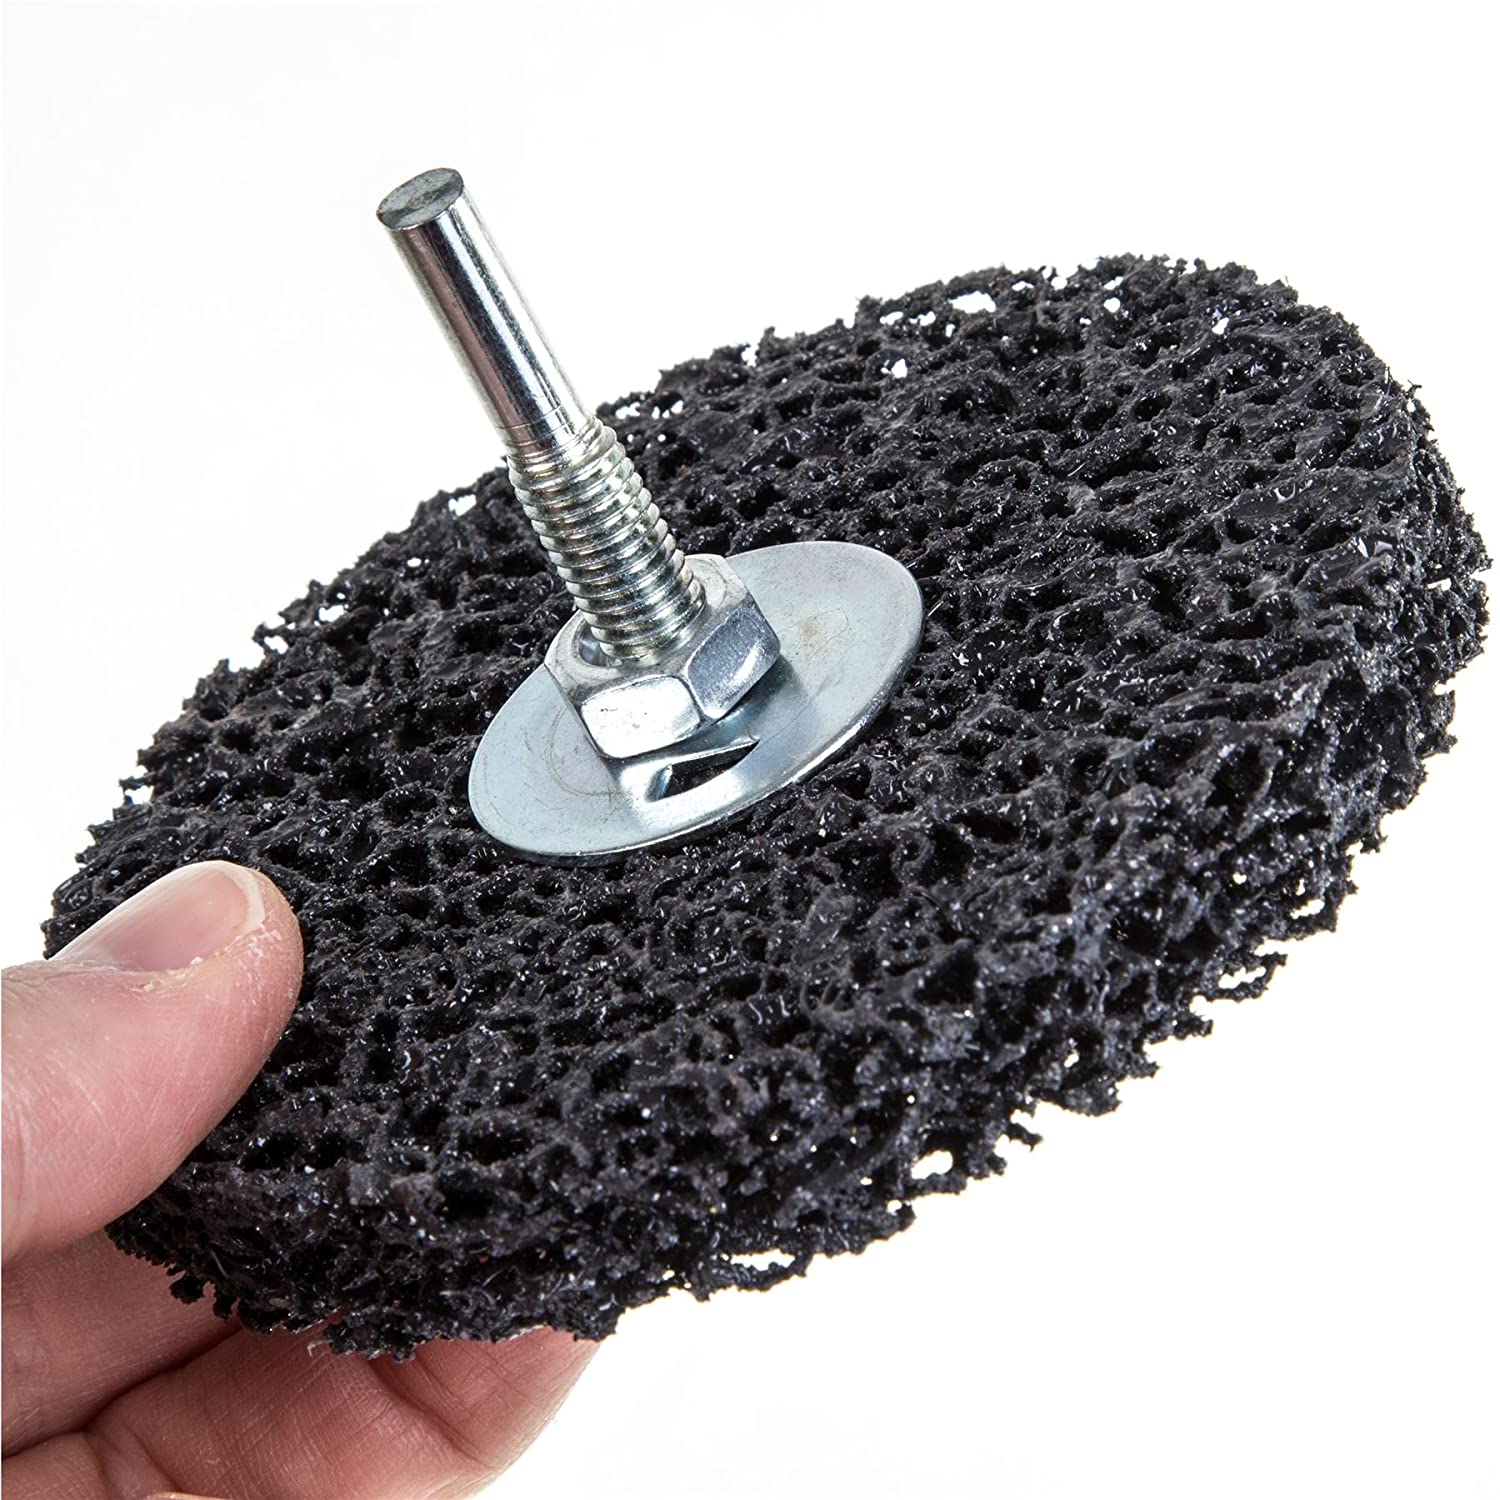 Rust / Paint 100mm Remover Disc Wheels - Grinder/Drill Abrasive Stripping Bits